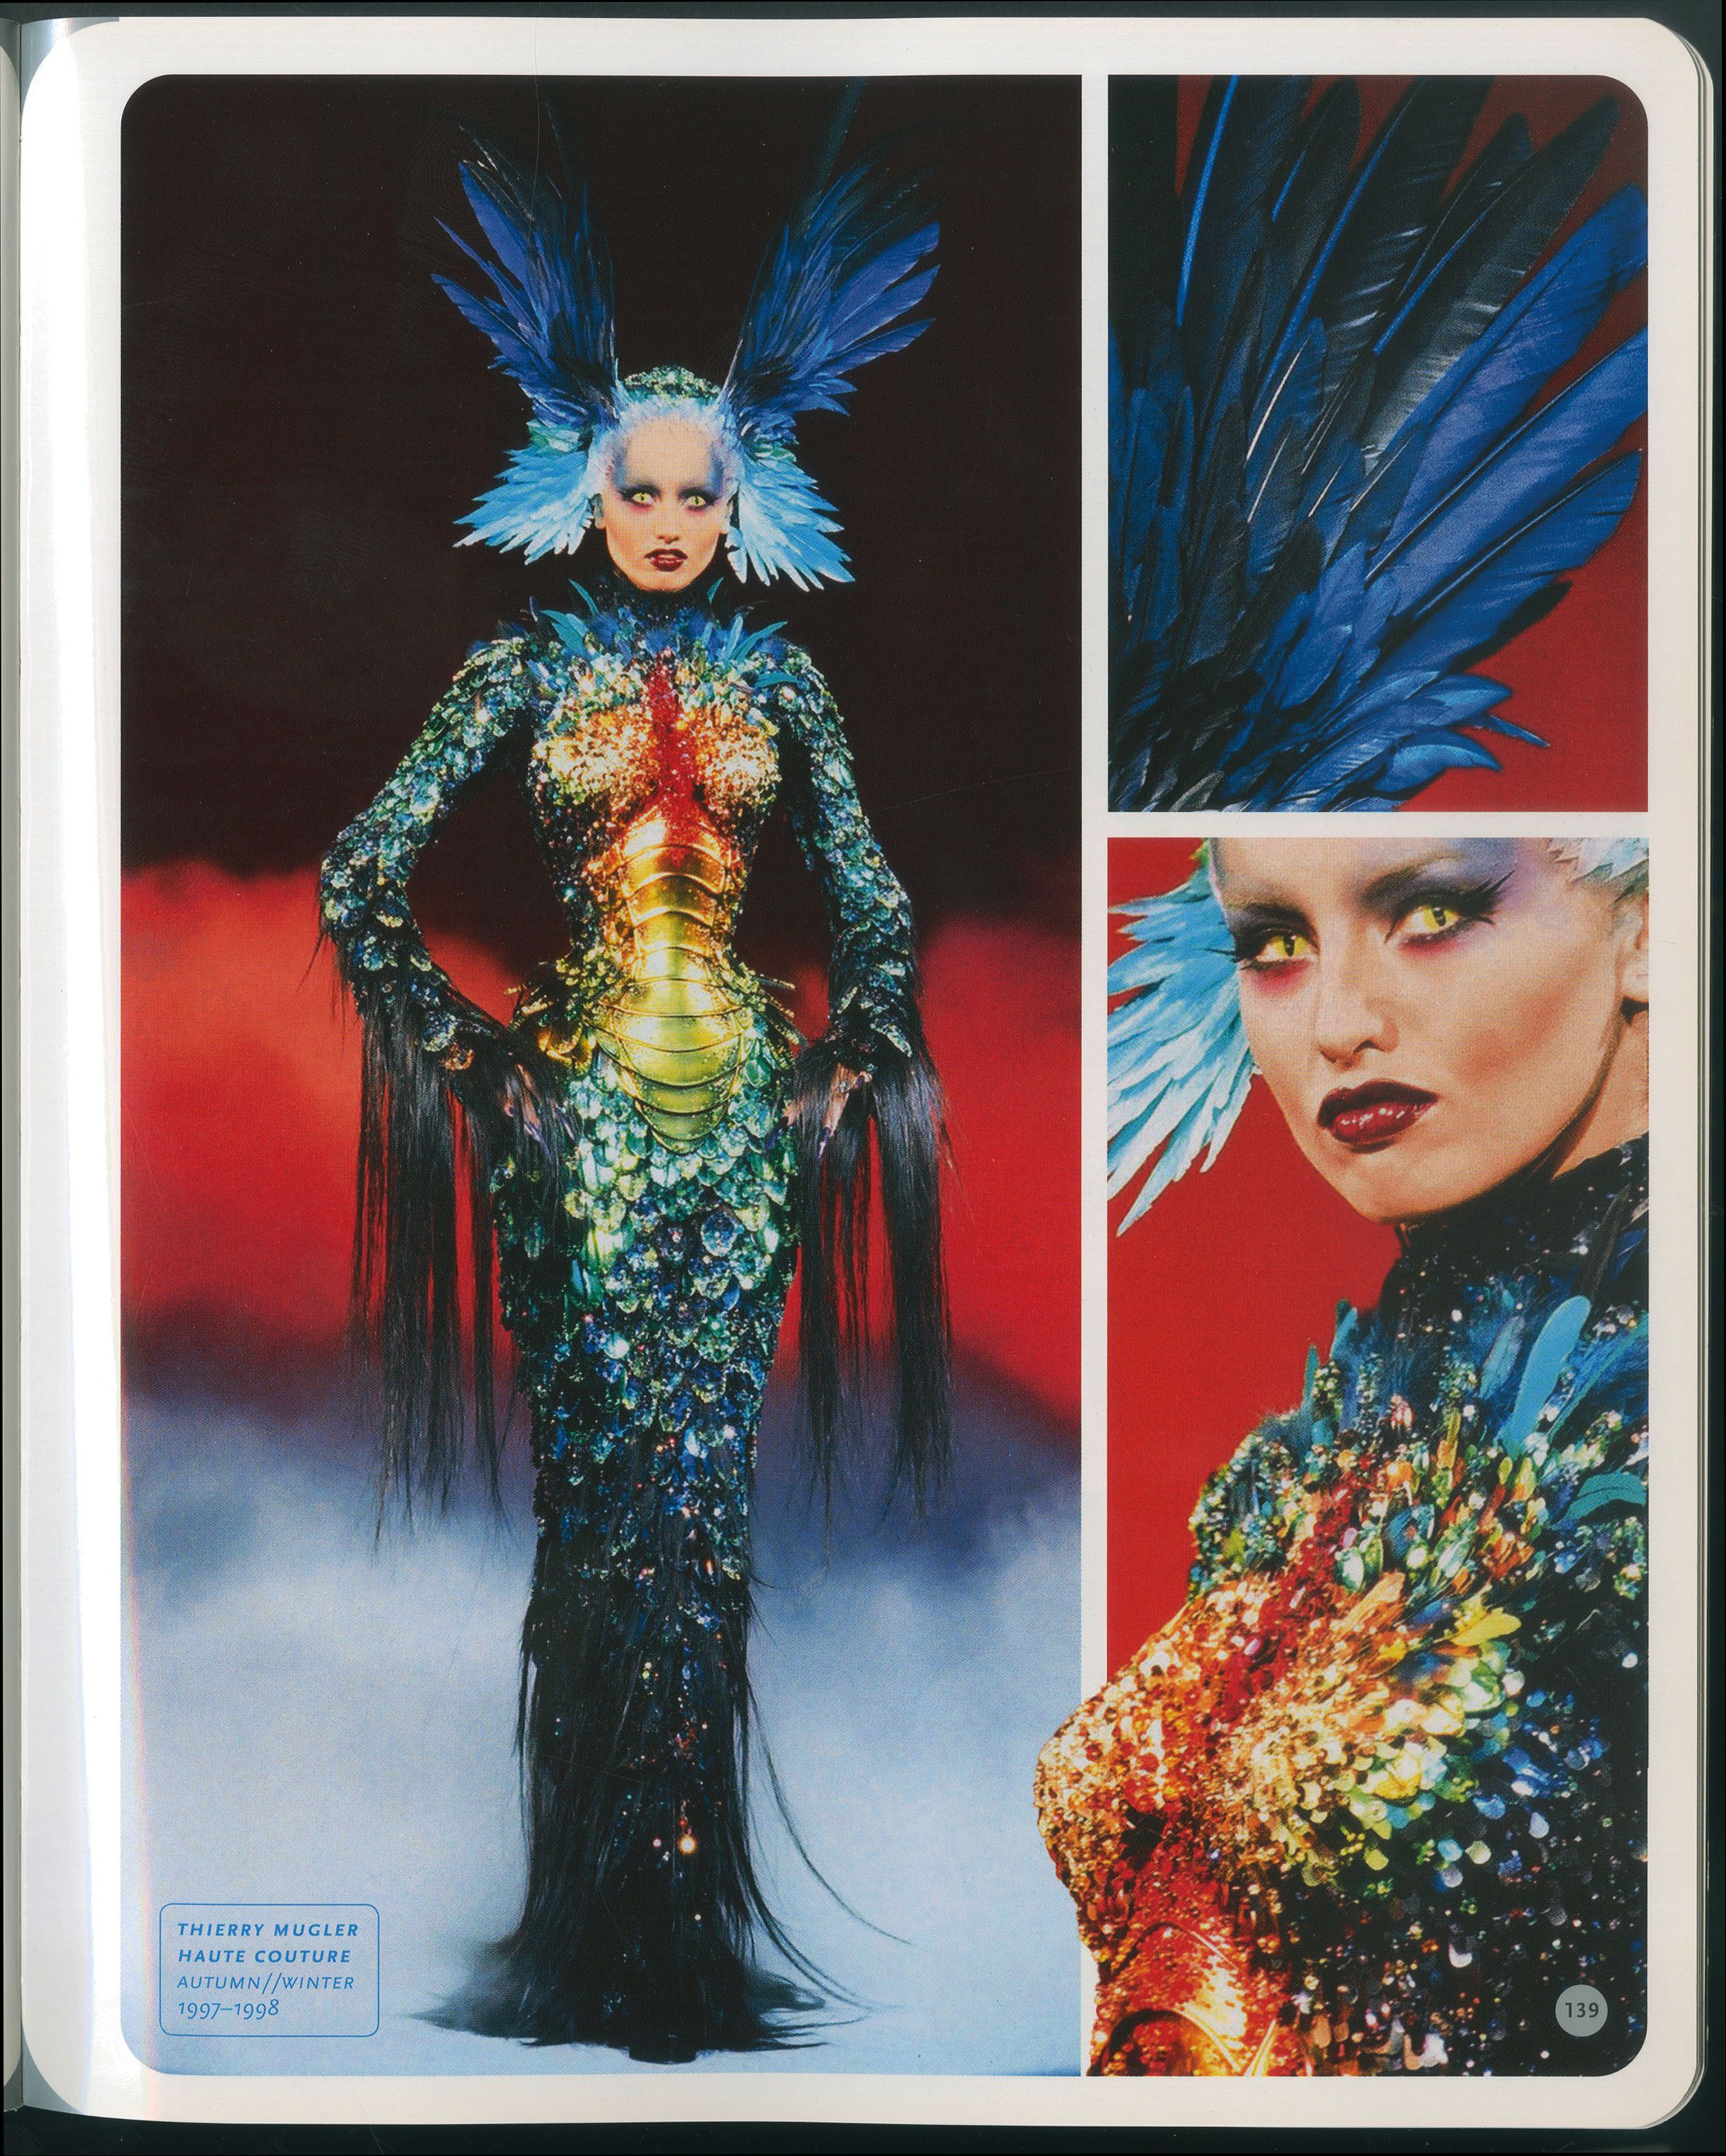 THIERRY MUGLER HAUTE COUTURE A/I 1997-1998